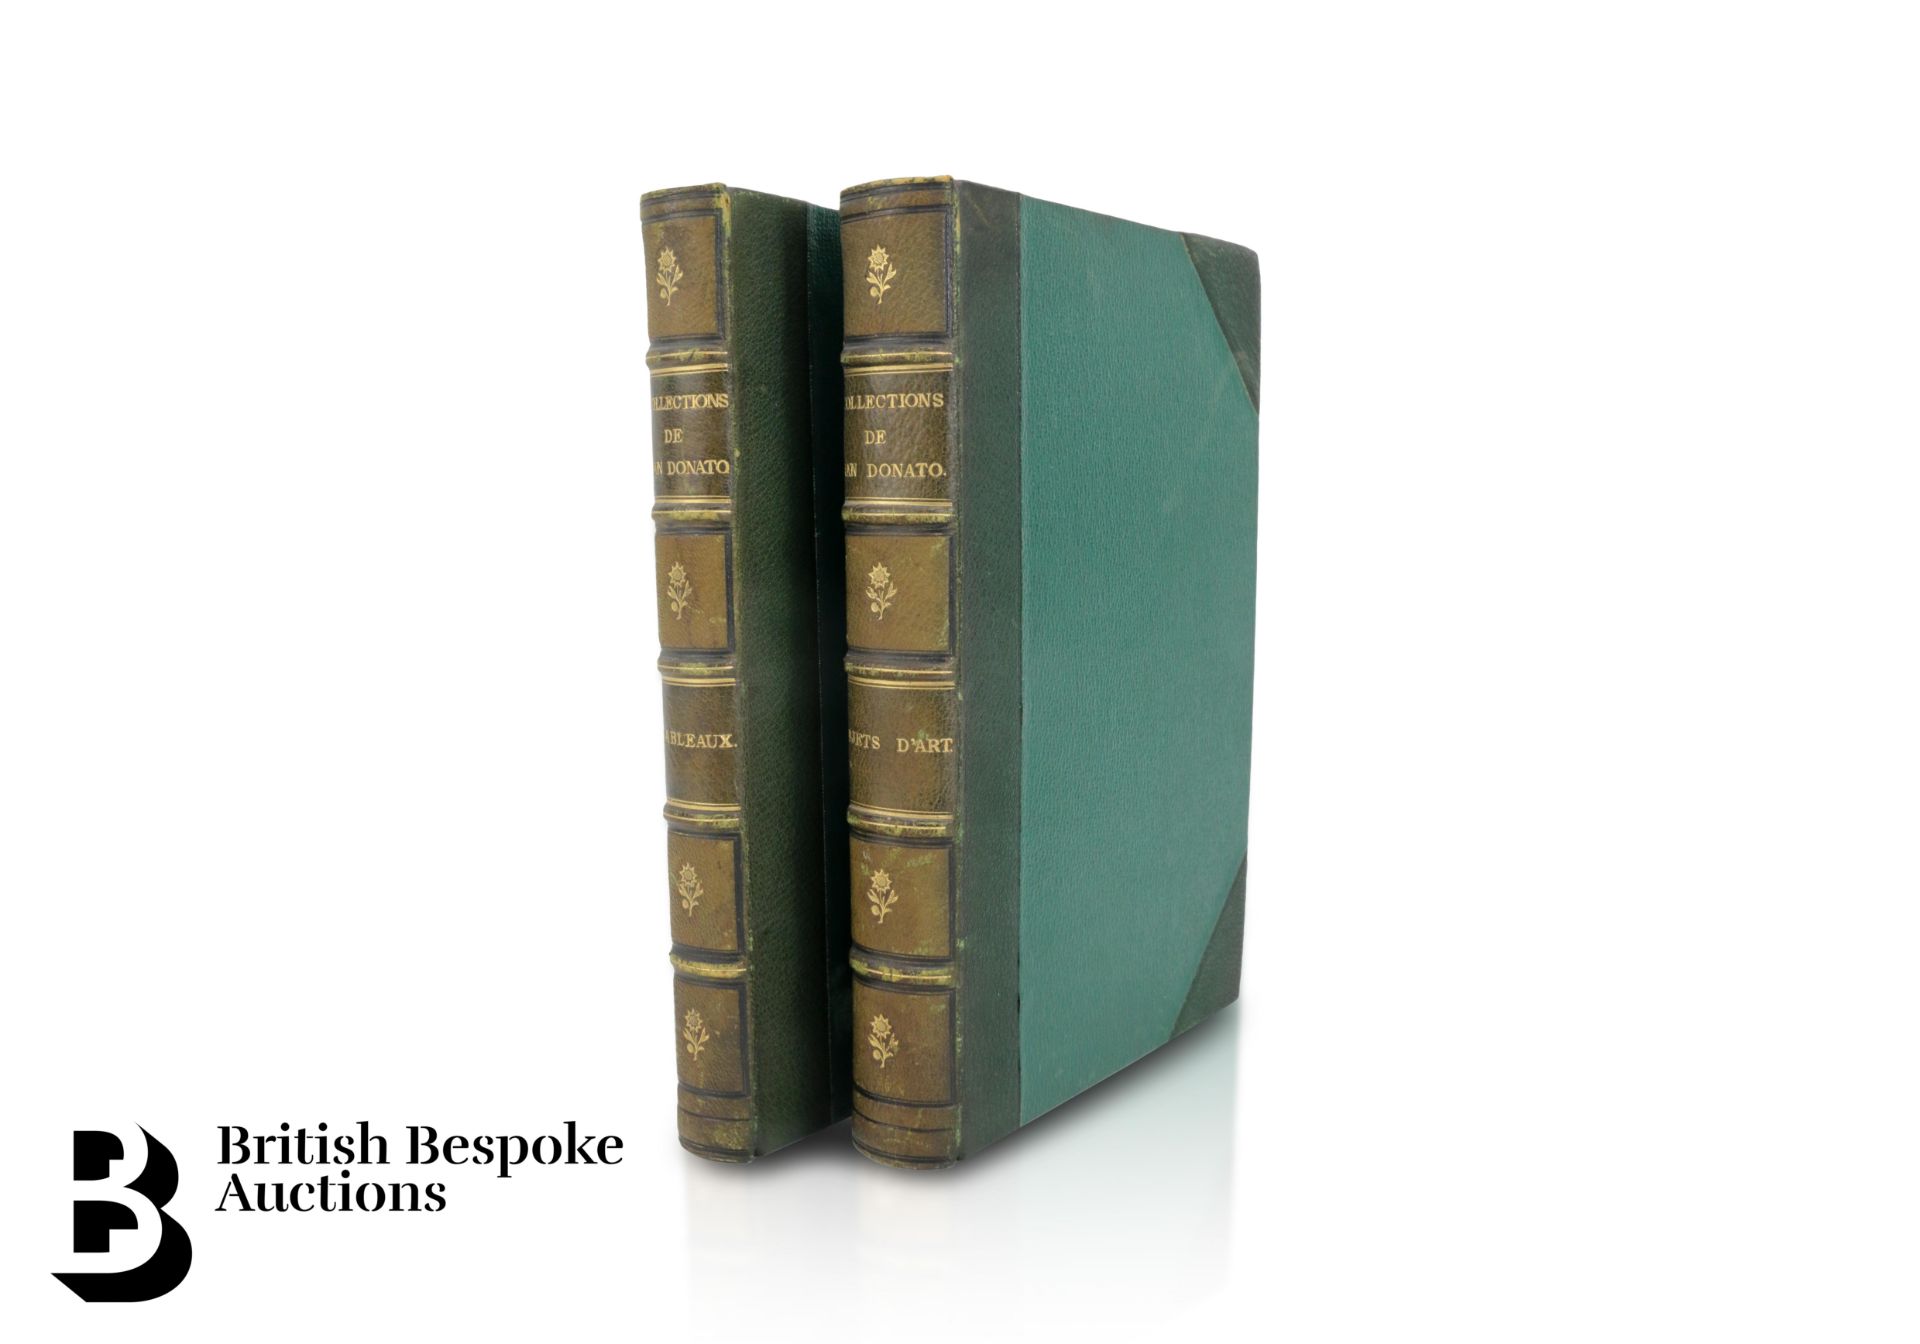 Two Volumes of Collection de San Donato Auction Catalogue - Image 2 of 2